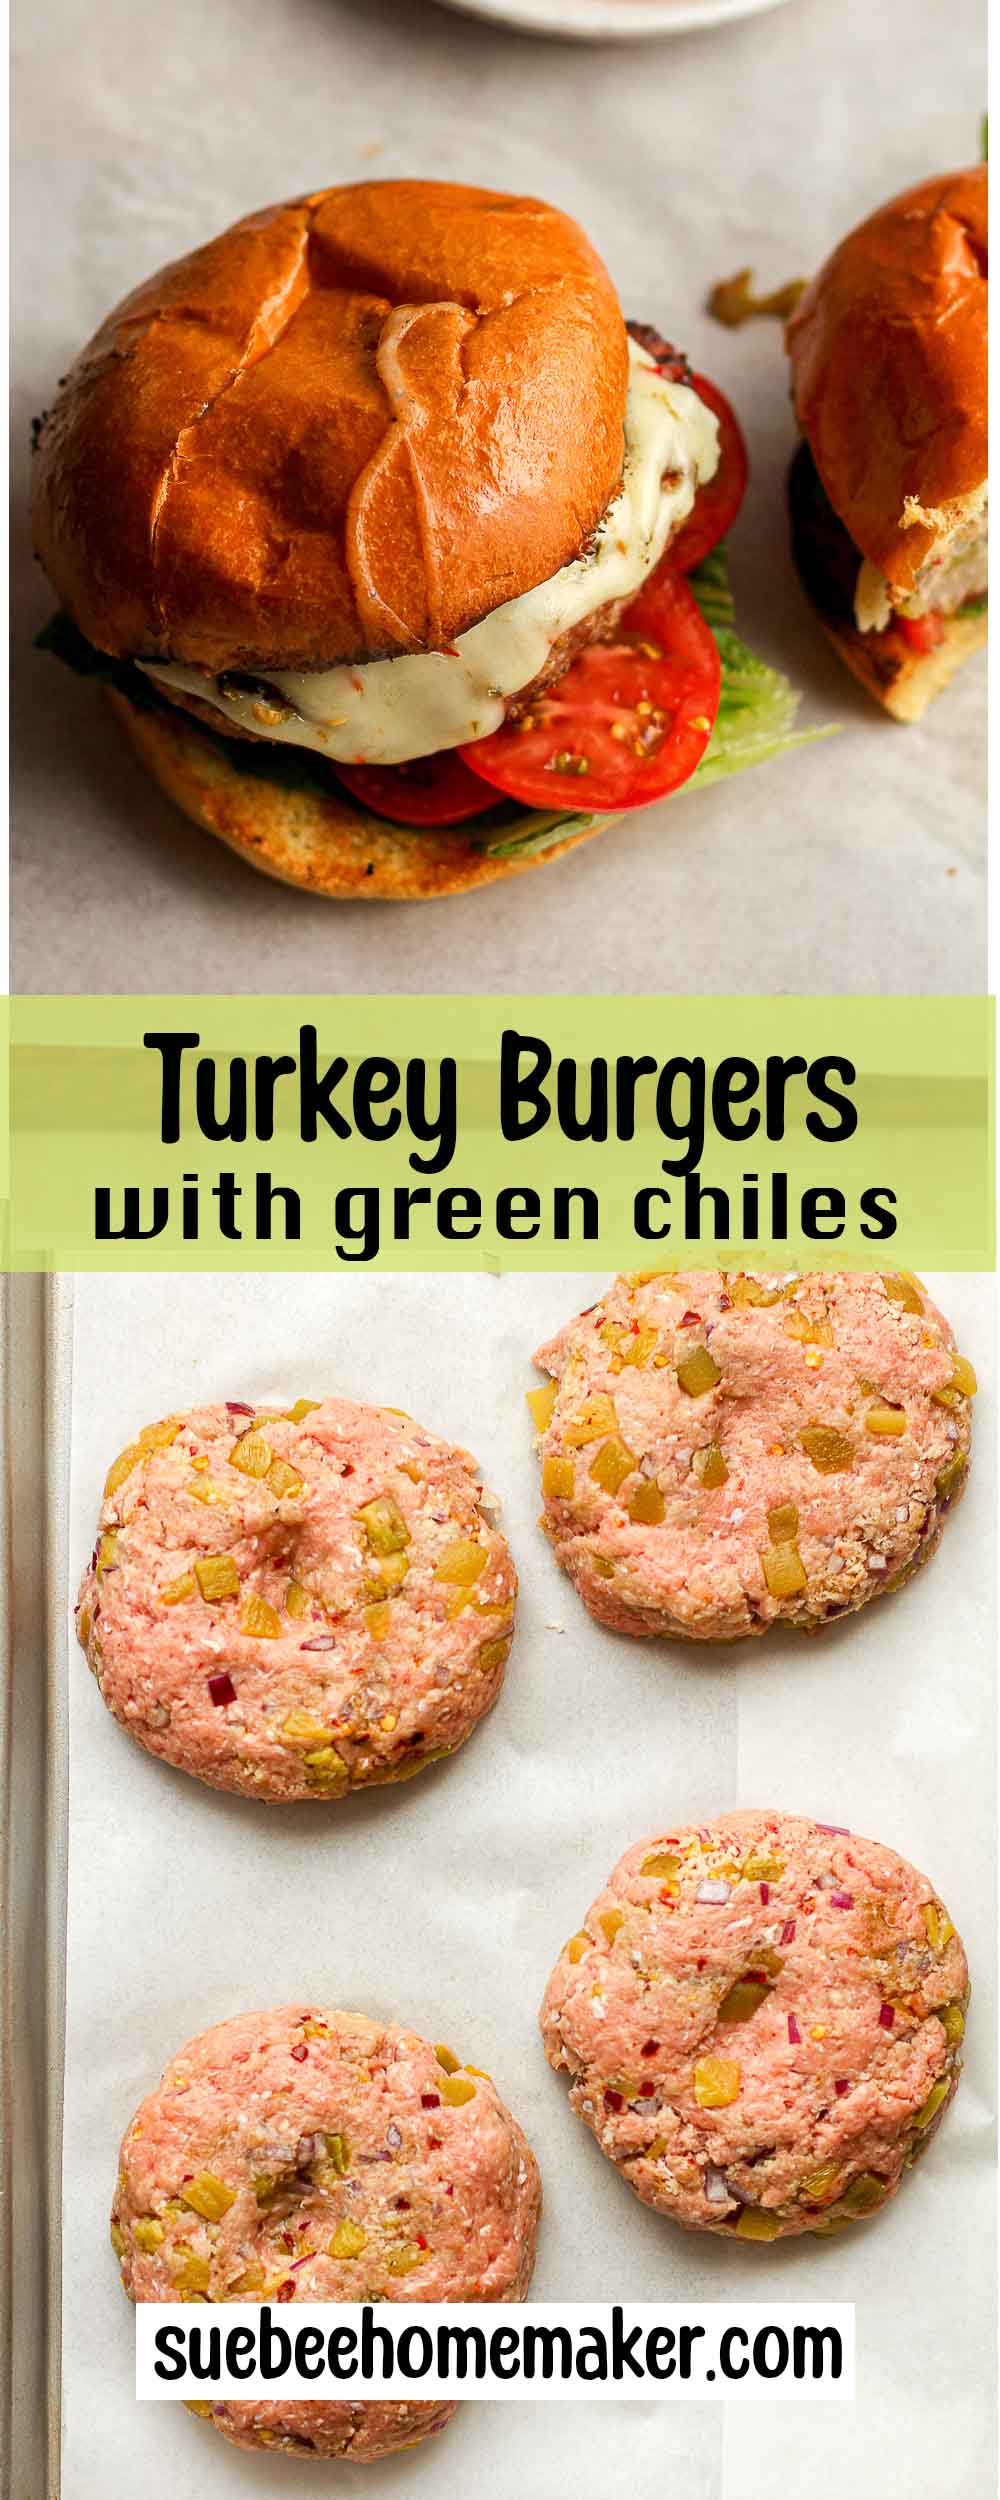 A collage of photos of turkey burgers with Green Chiles.